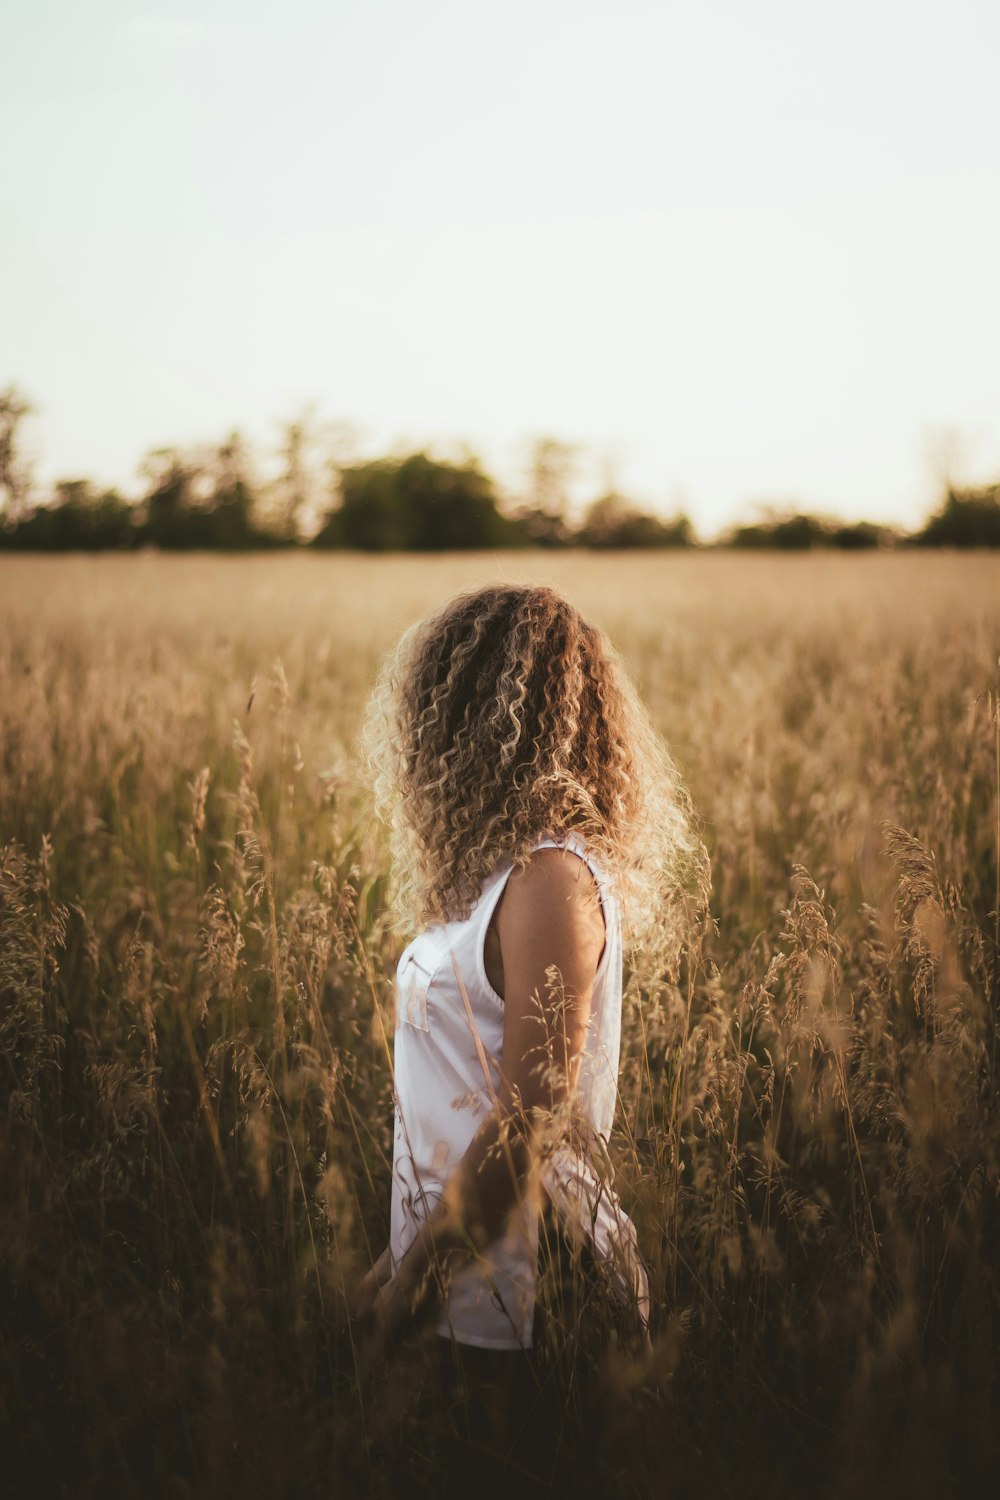 woman in white tank top standing on brown grass field during daytime